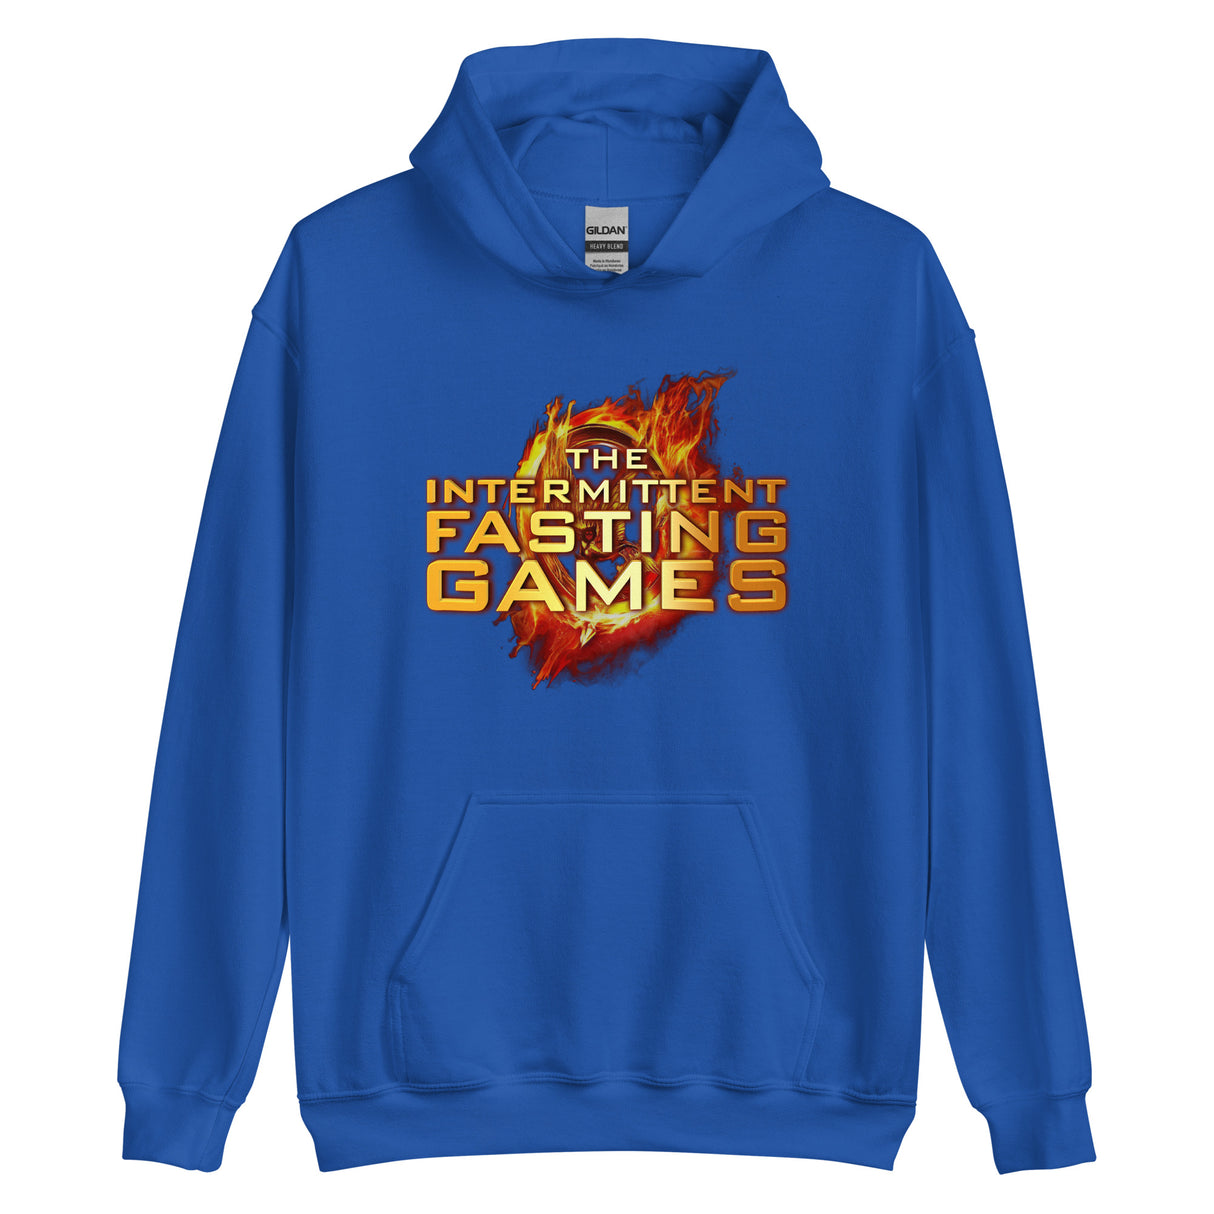 The Intermittent Fasting Games Hoodie